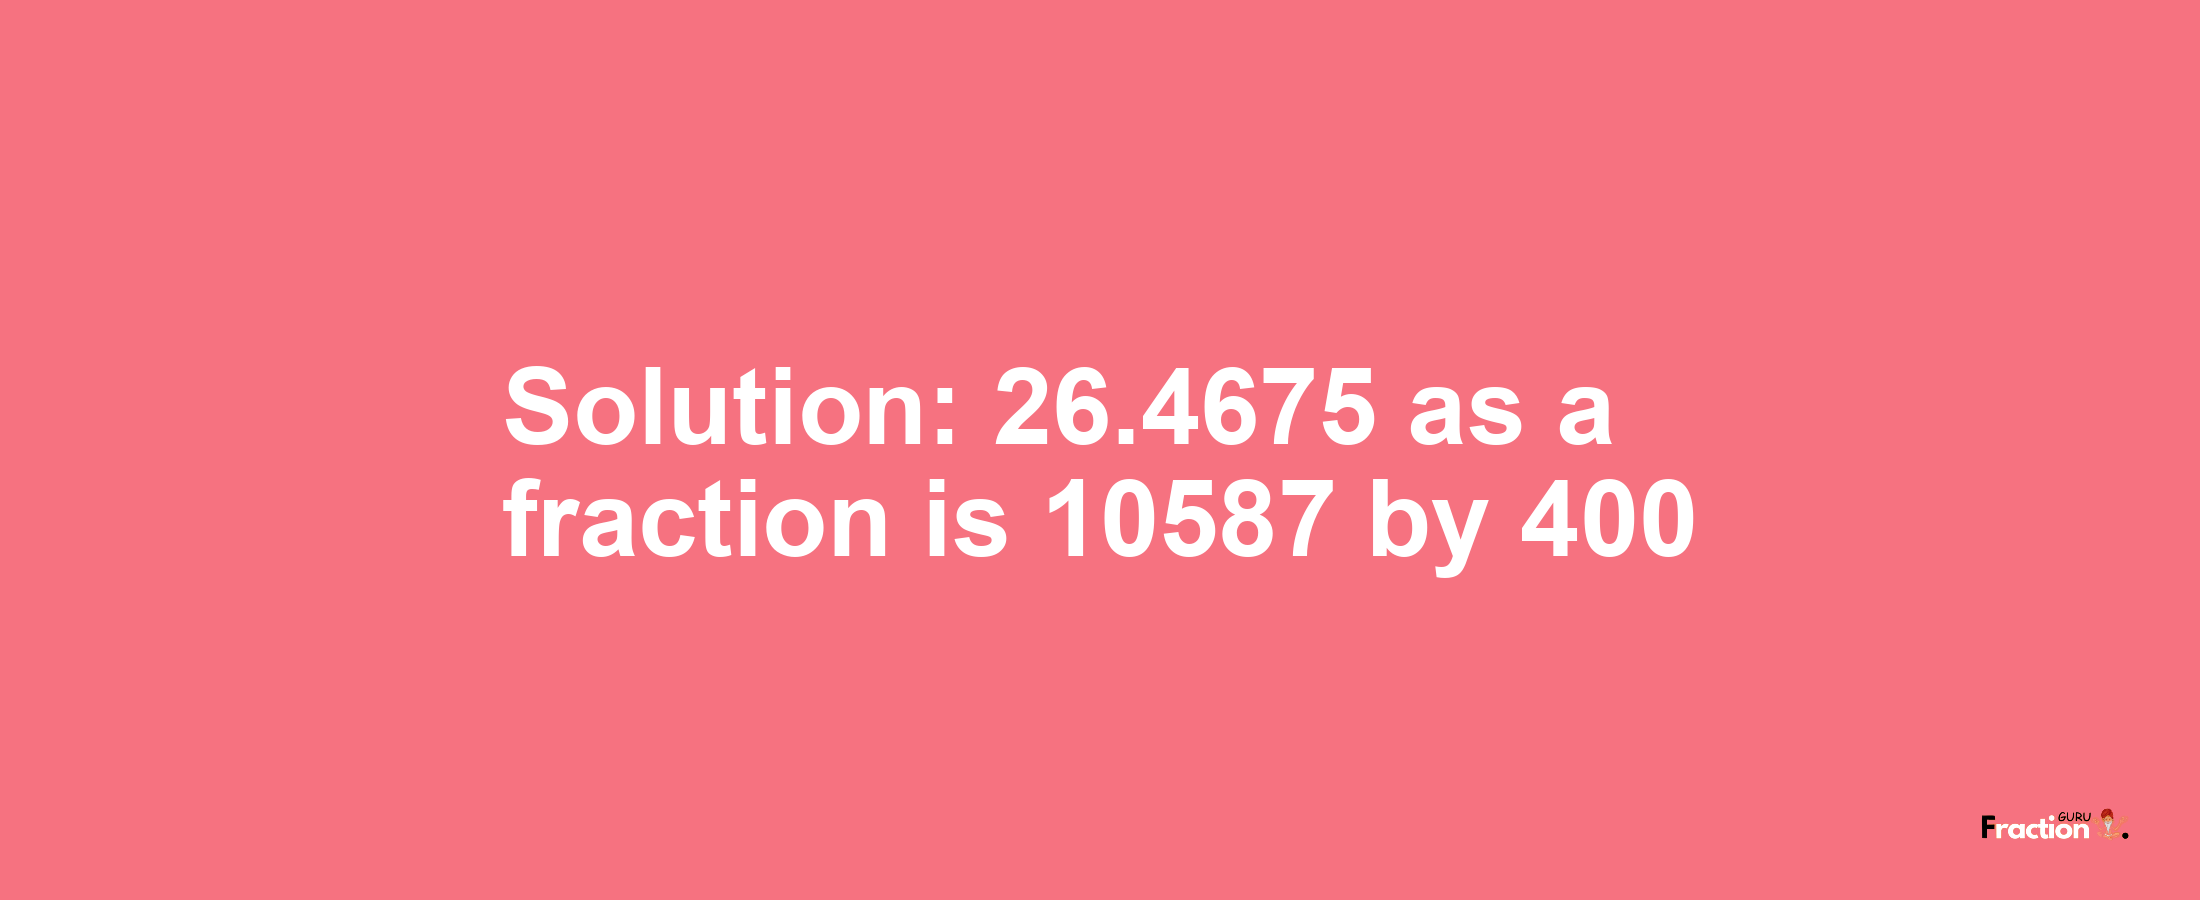 Solution:26.4675 as a fraction is 10587/400